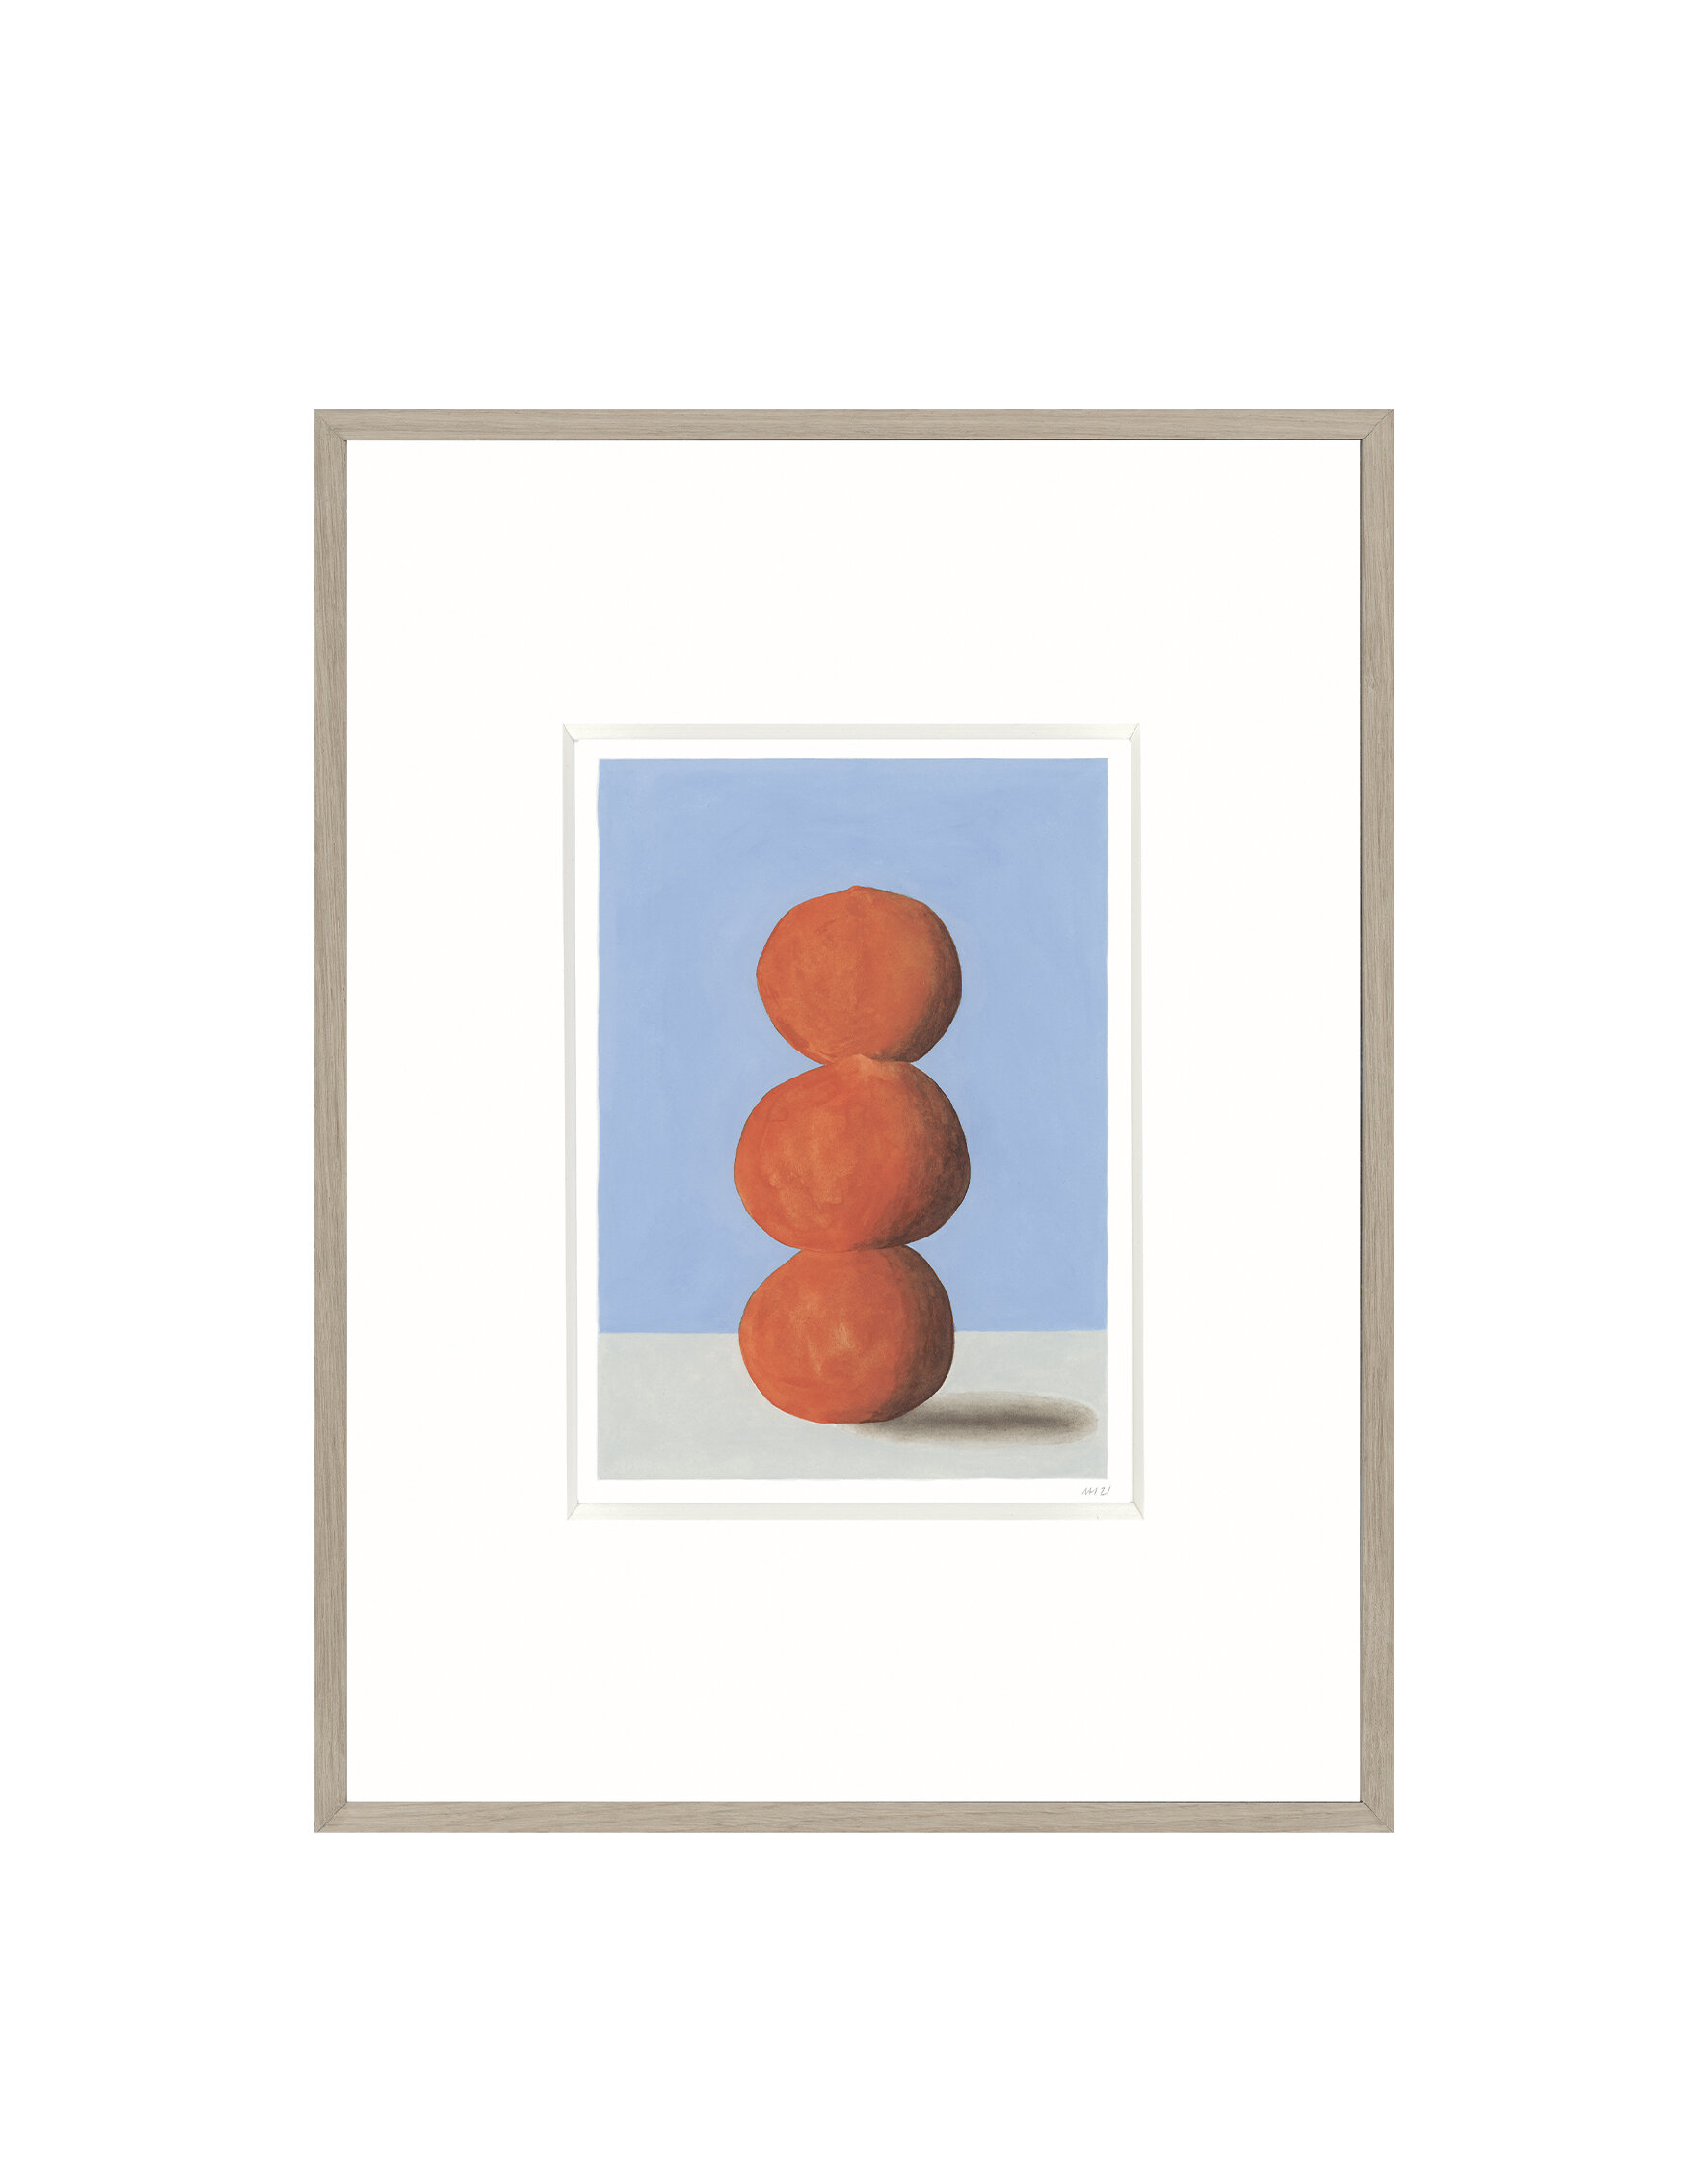 Title: Stacked clementines